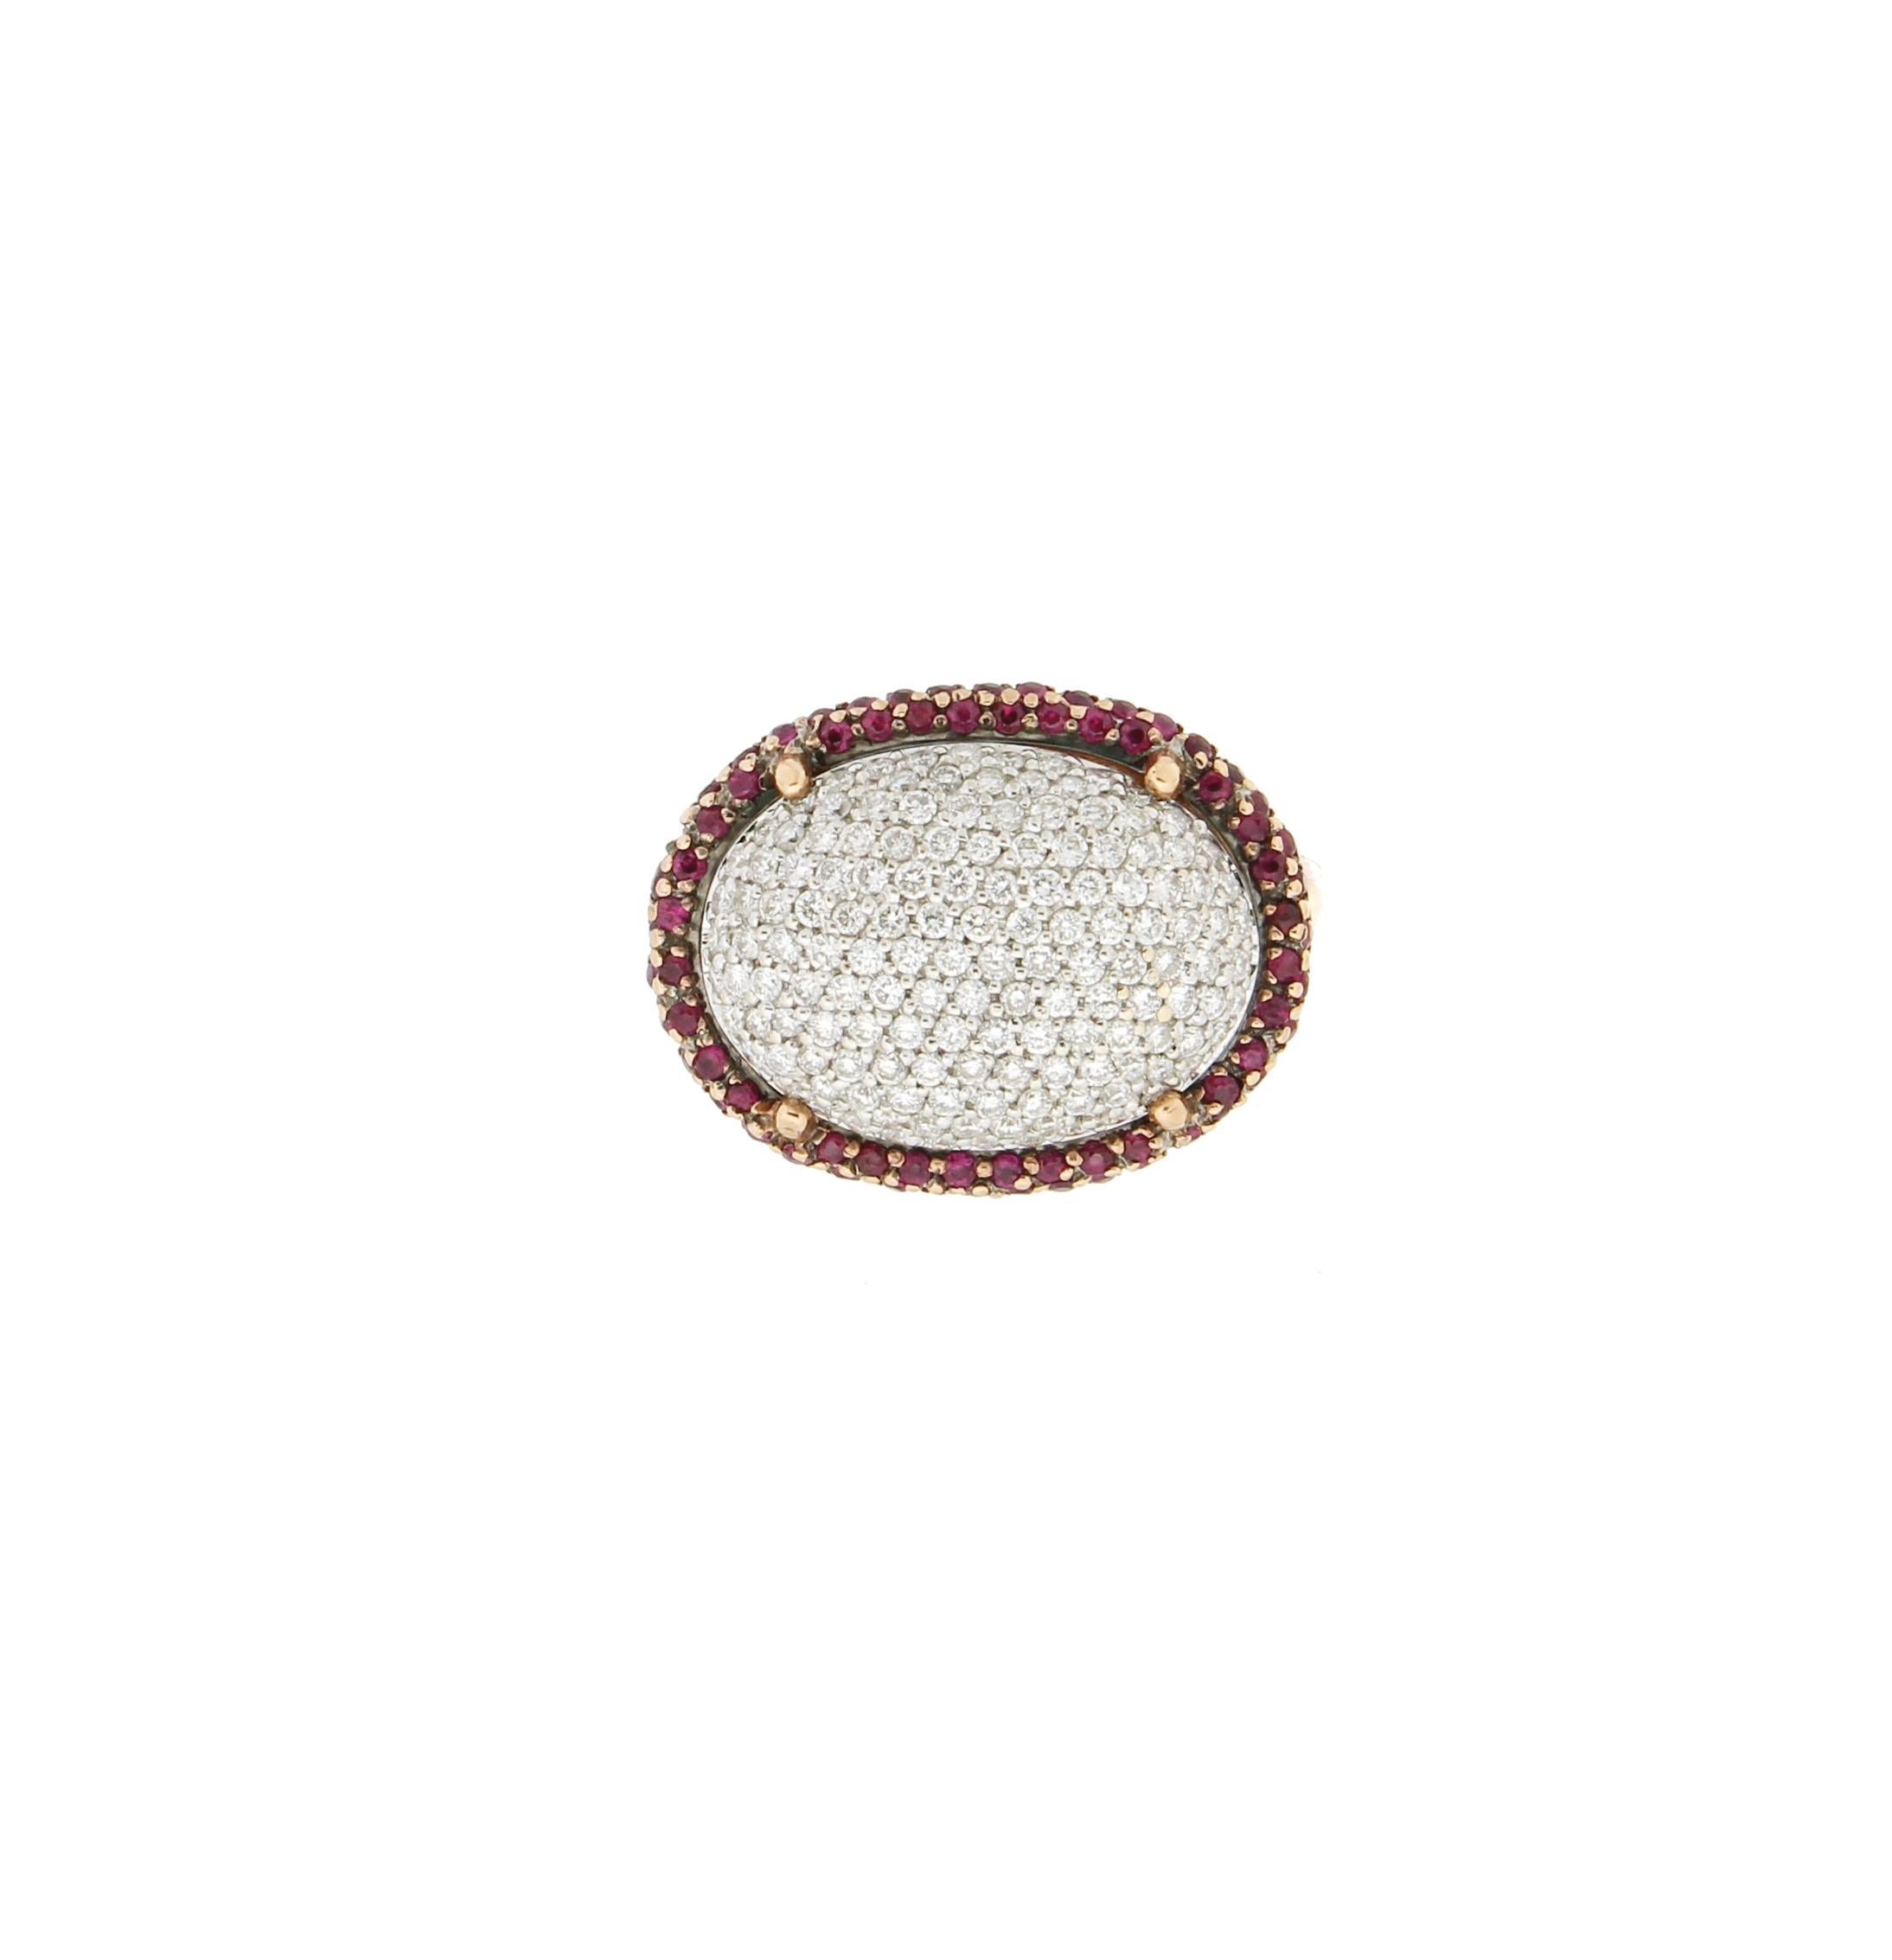 Handcraft Rubies 18 Karat White and Yellow Gold Diamonds Cocktail Ring For Sale 1